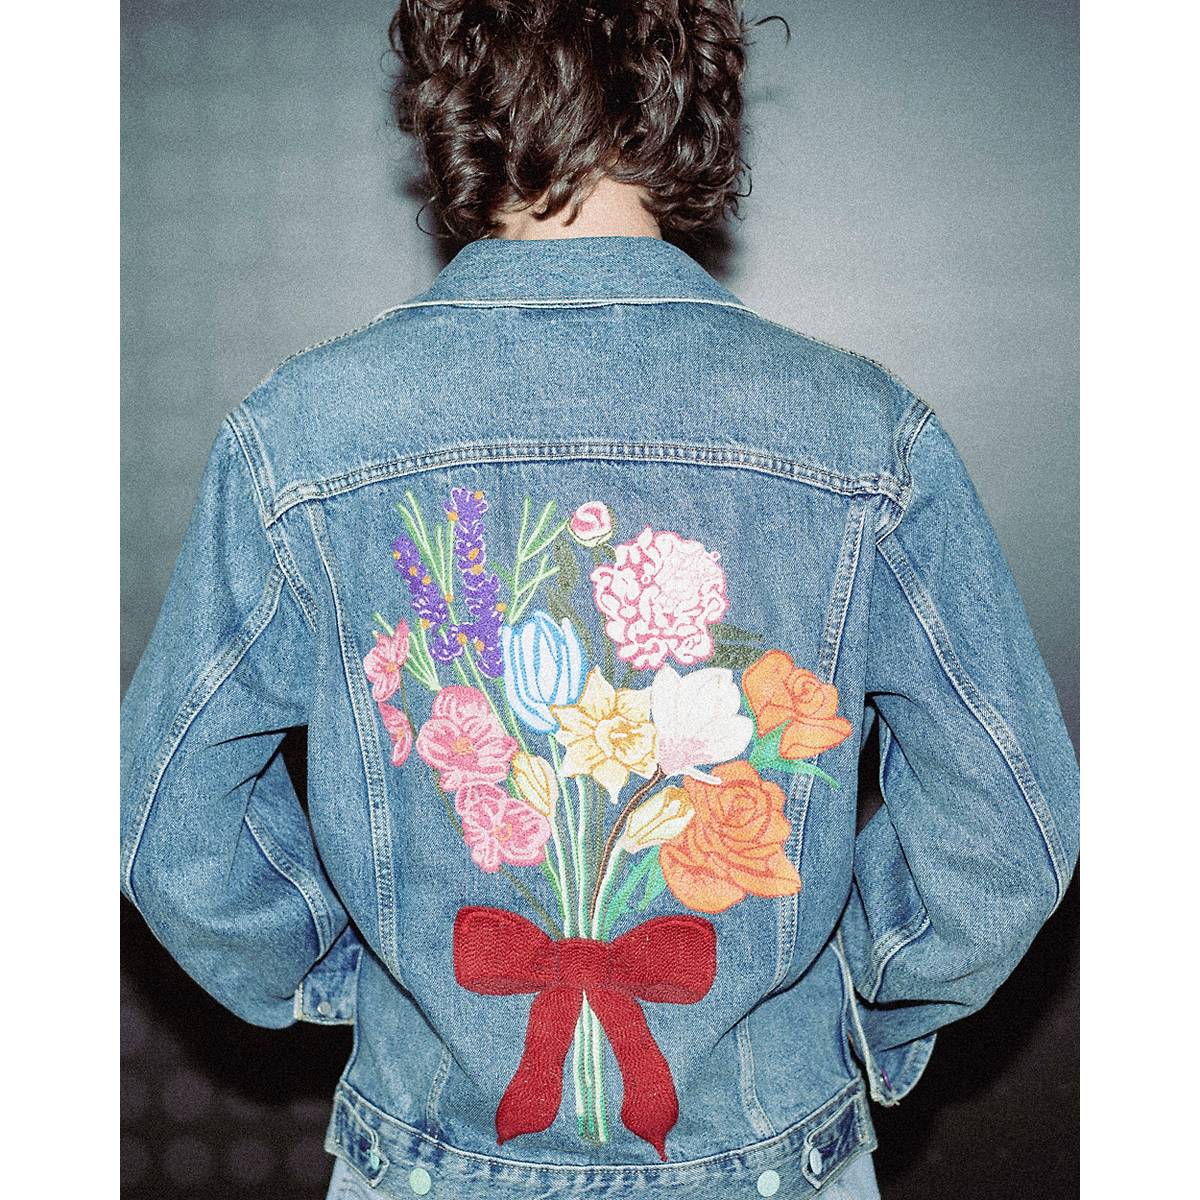 Detail shot of a white jacket with floral white, pink and orange embroidery